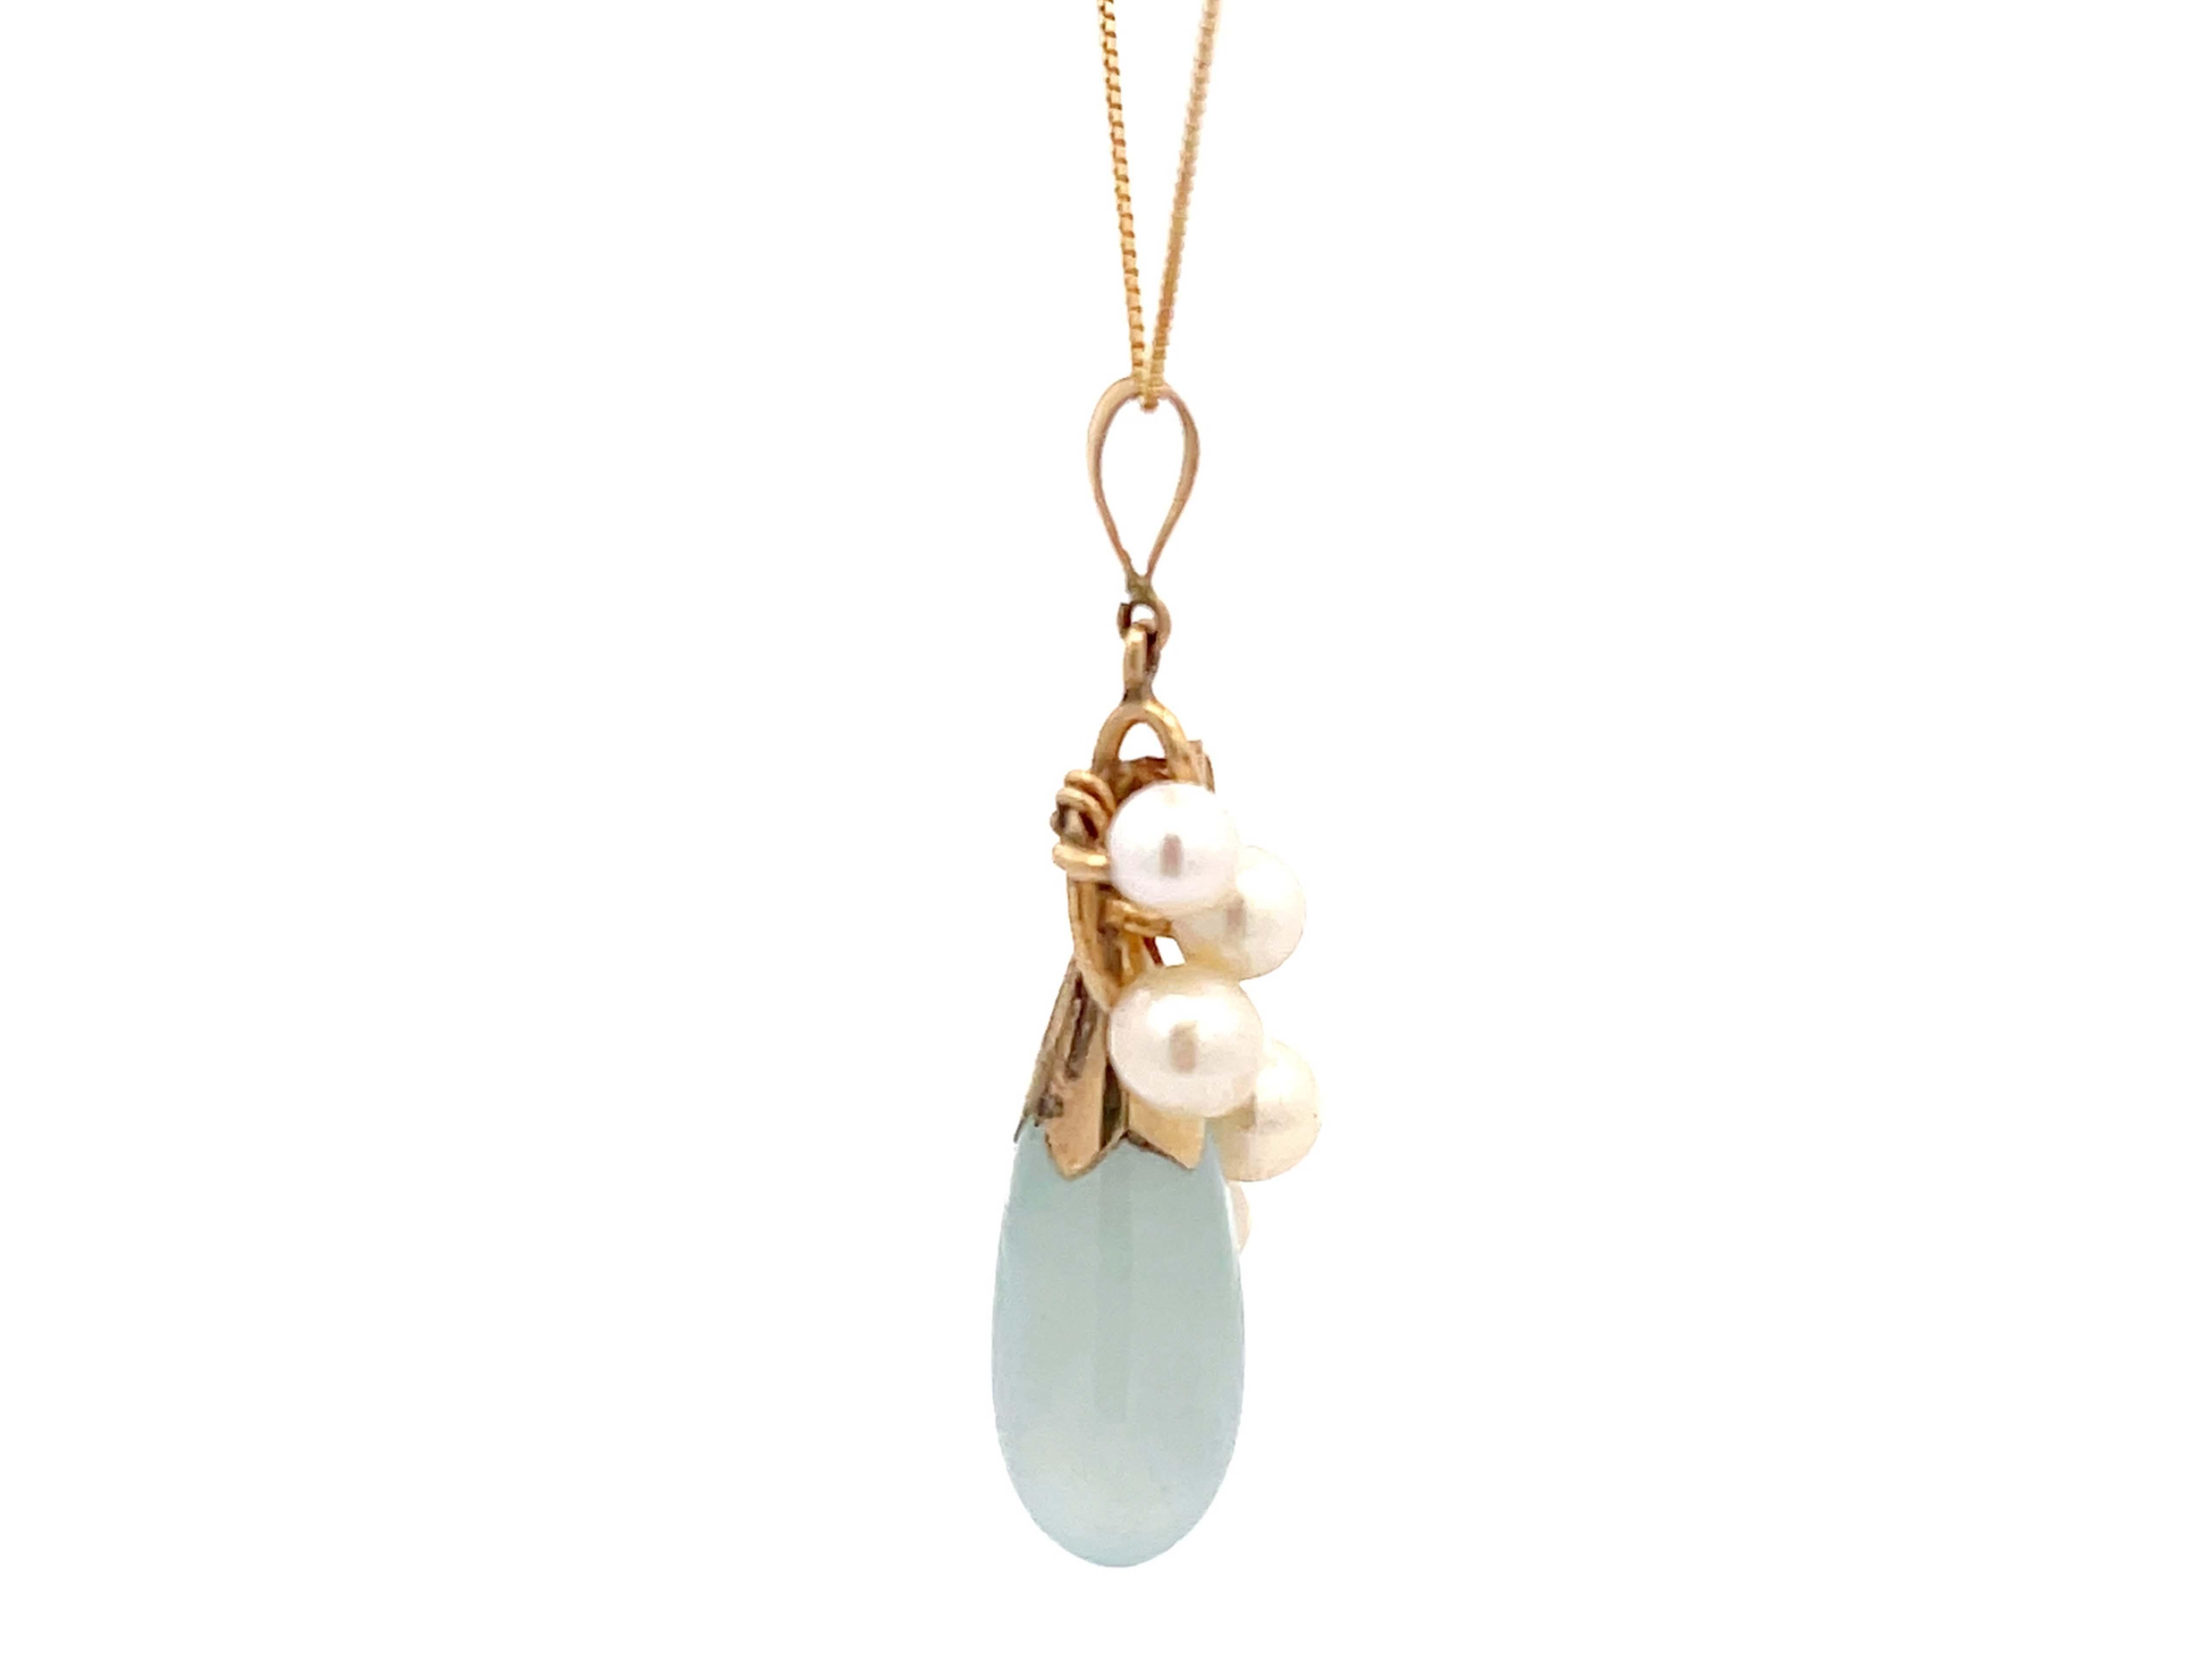 Modern Mings Hawaii Jade and Pearl Leaf Pendant in 14k Yellow Gold with Chain